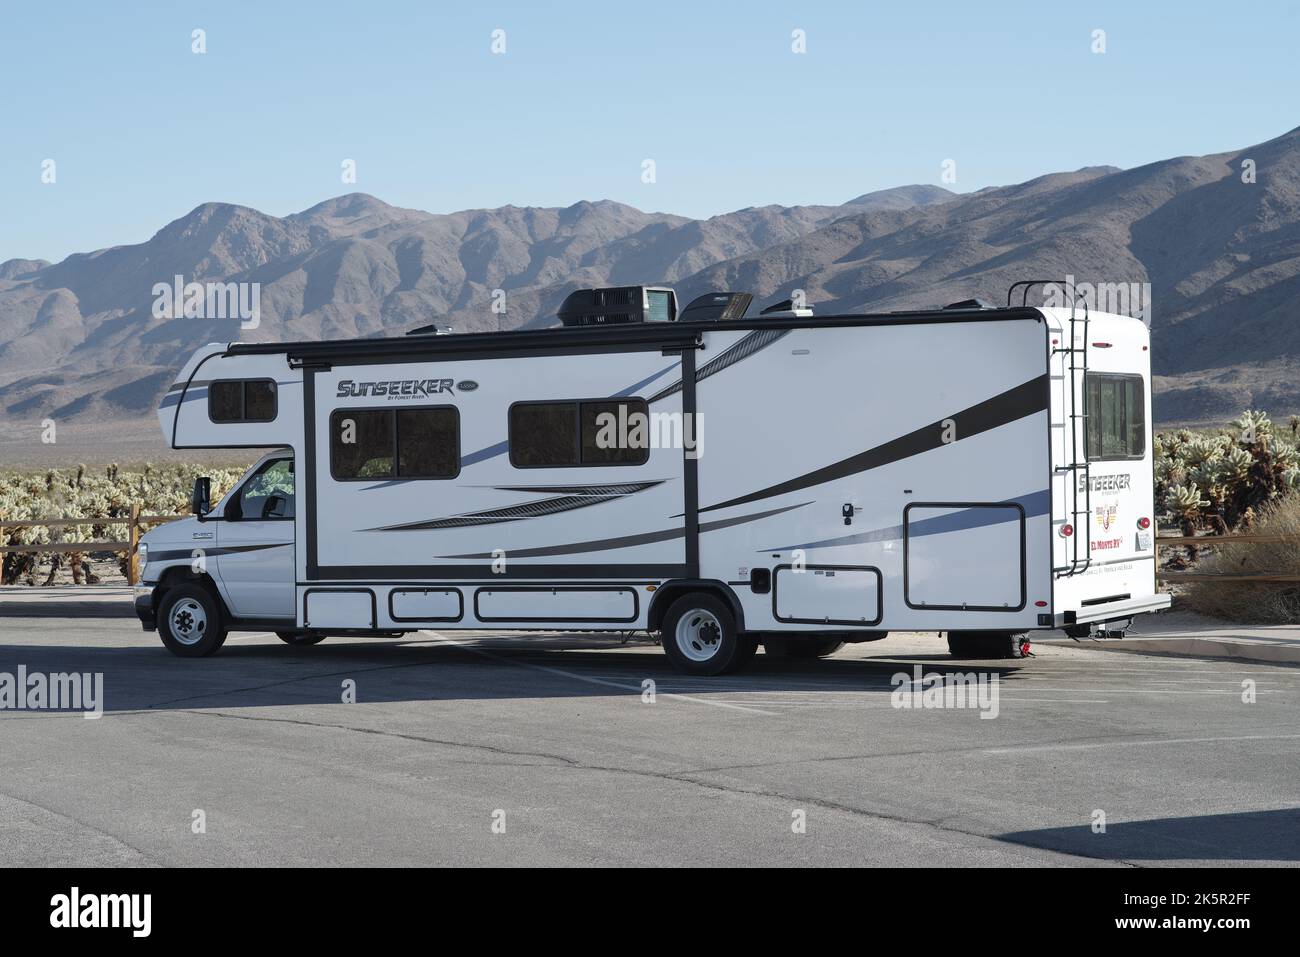 Joshua Tree National Park, California, United States - January 19, 2022: Recreational vehicle shown parked by the Cholla Cactus Garden Nature Trail. Stock Photo